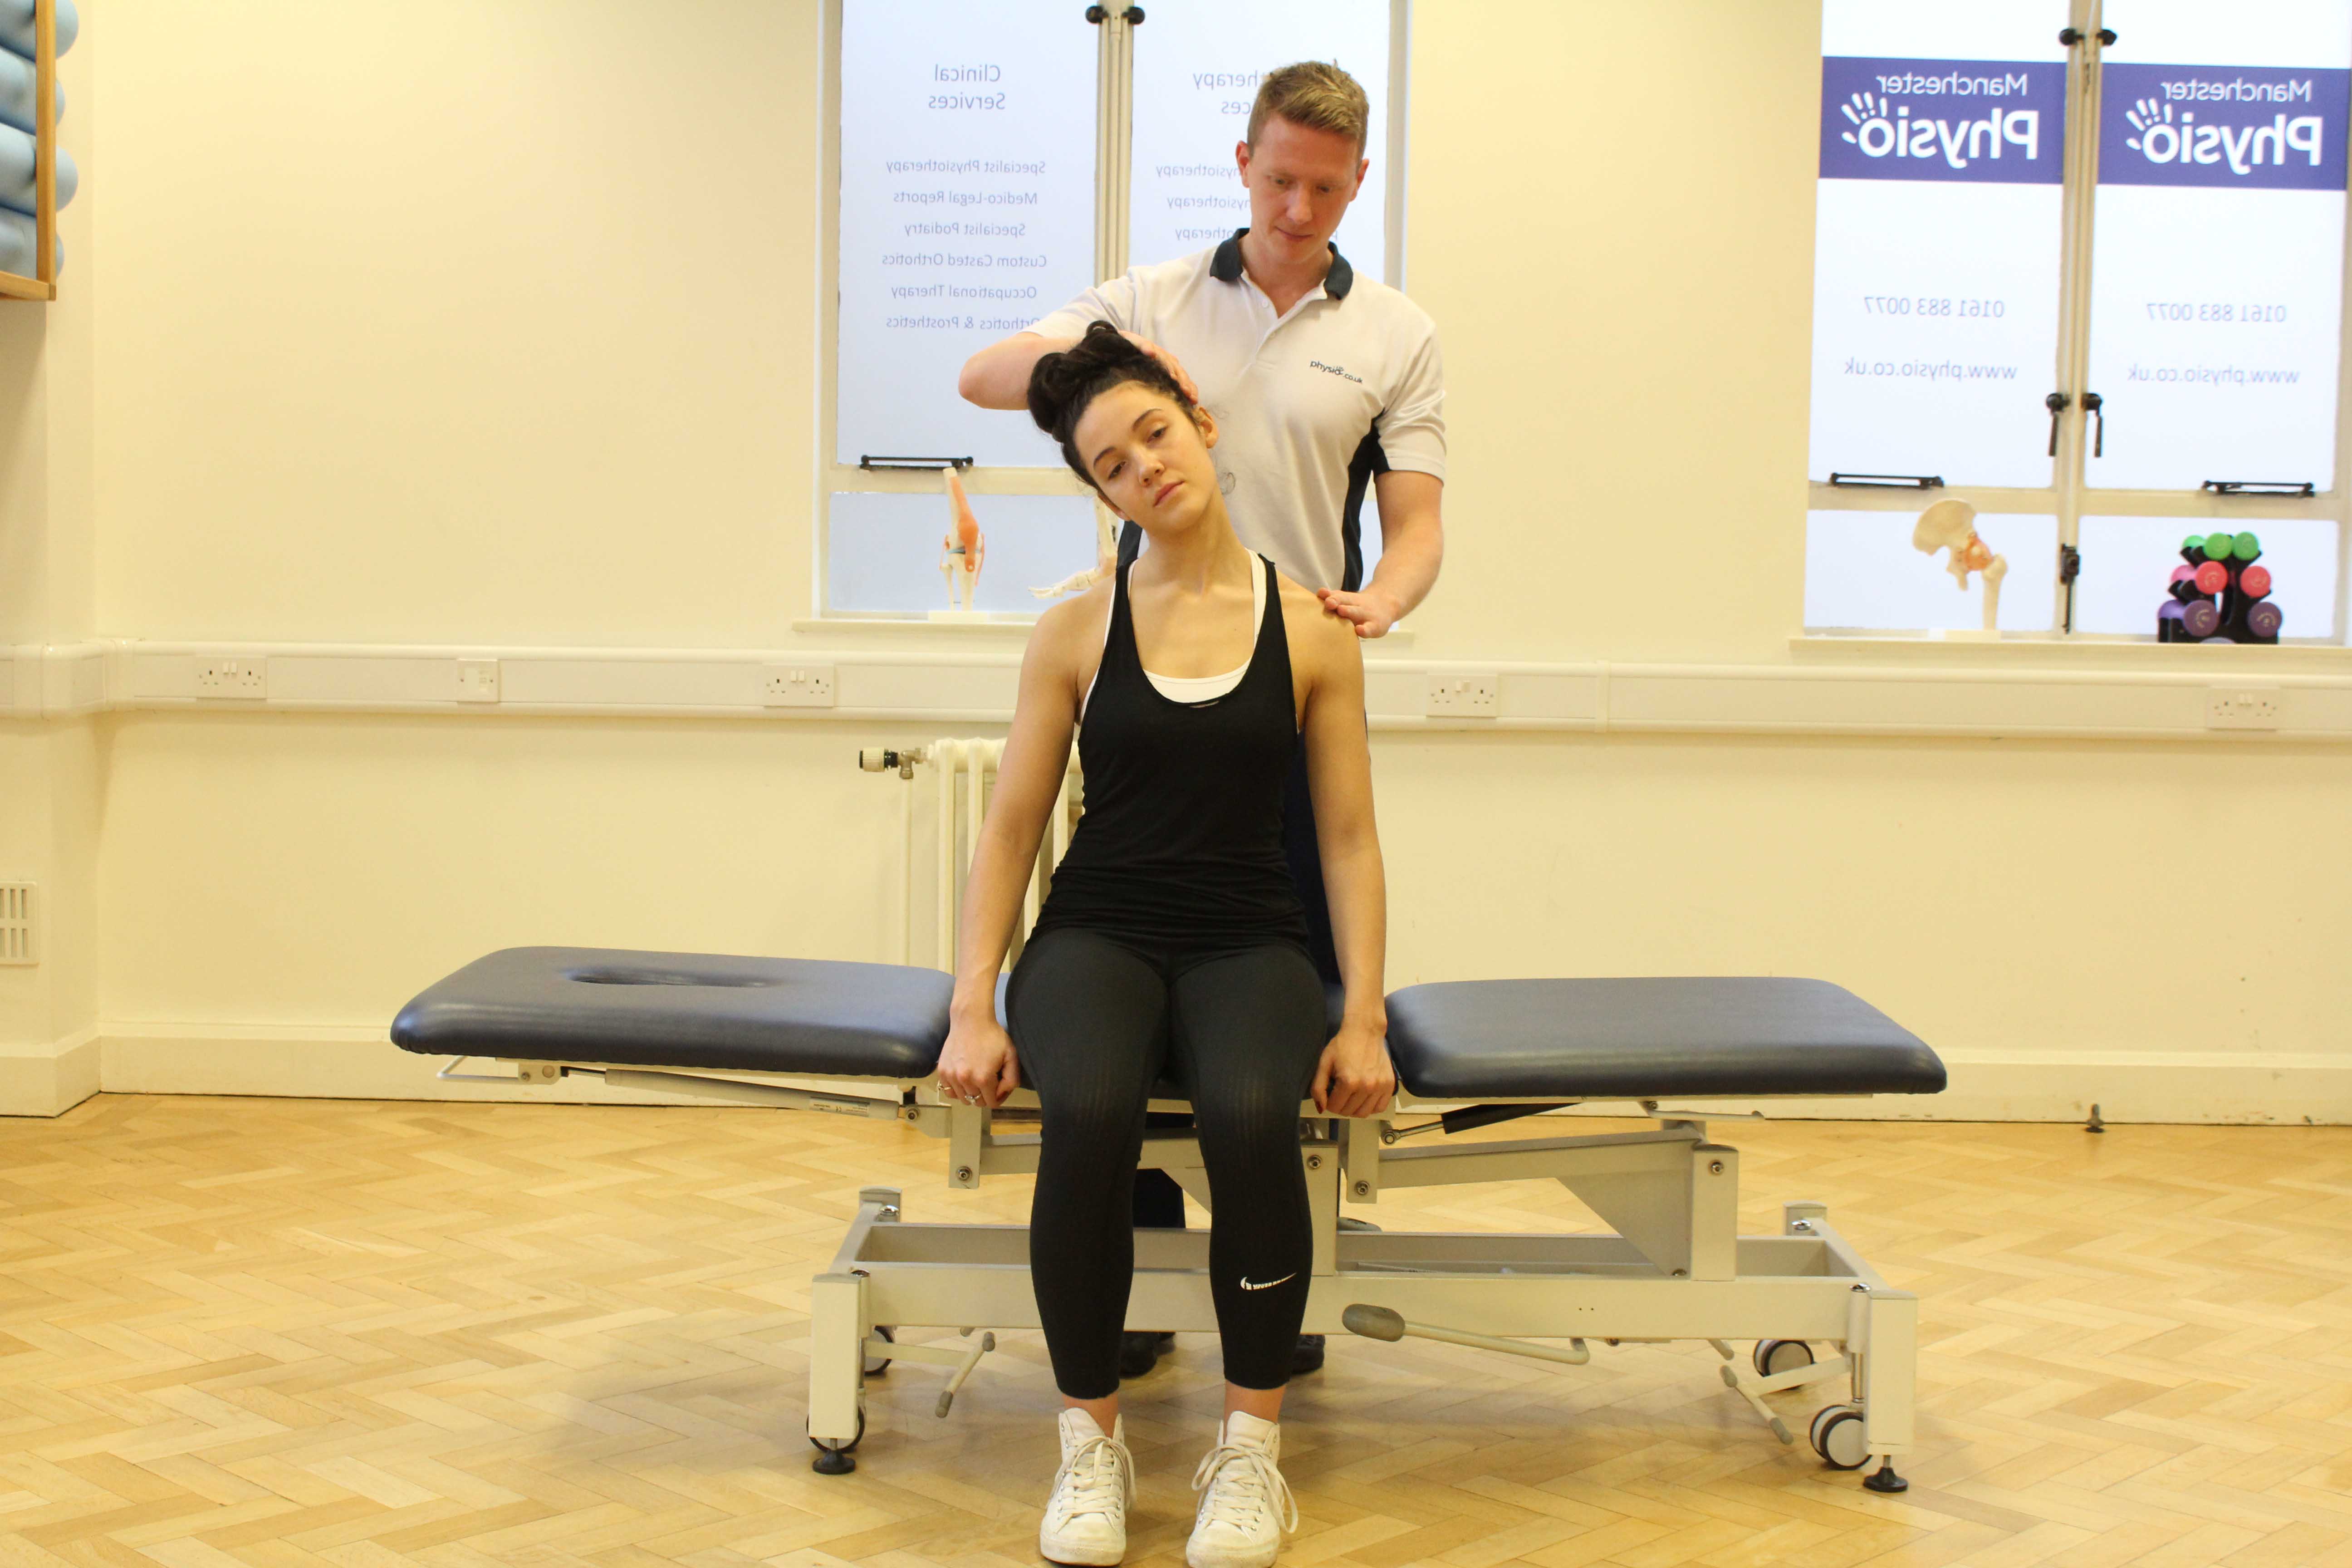 Assessment of the cervical spine, muscles and connective tissues in the neck performed by an experienced Physiotherapist